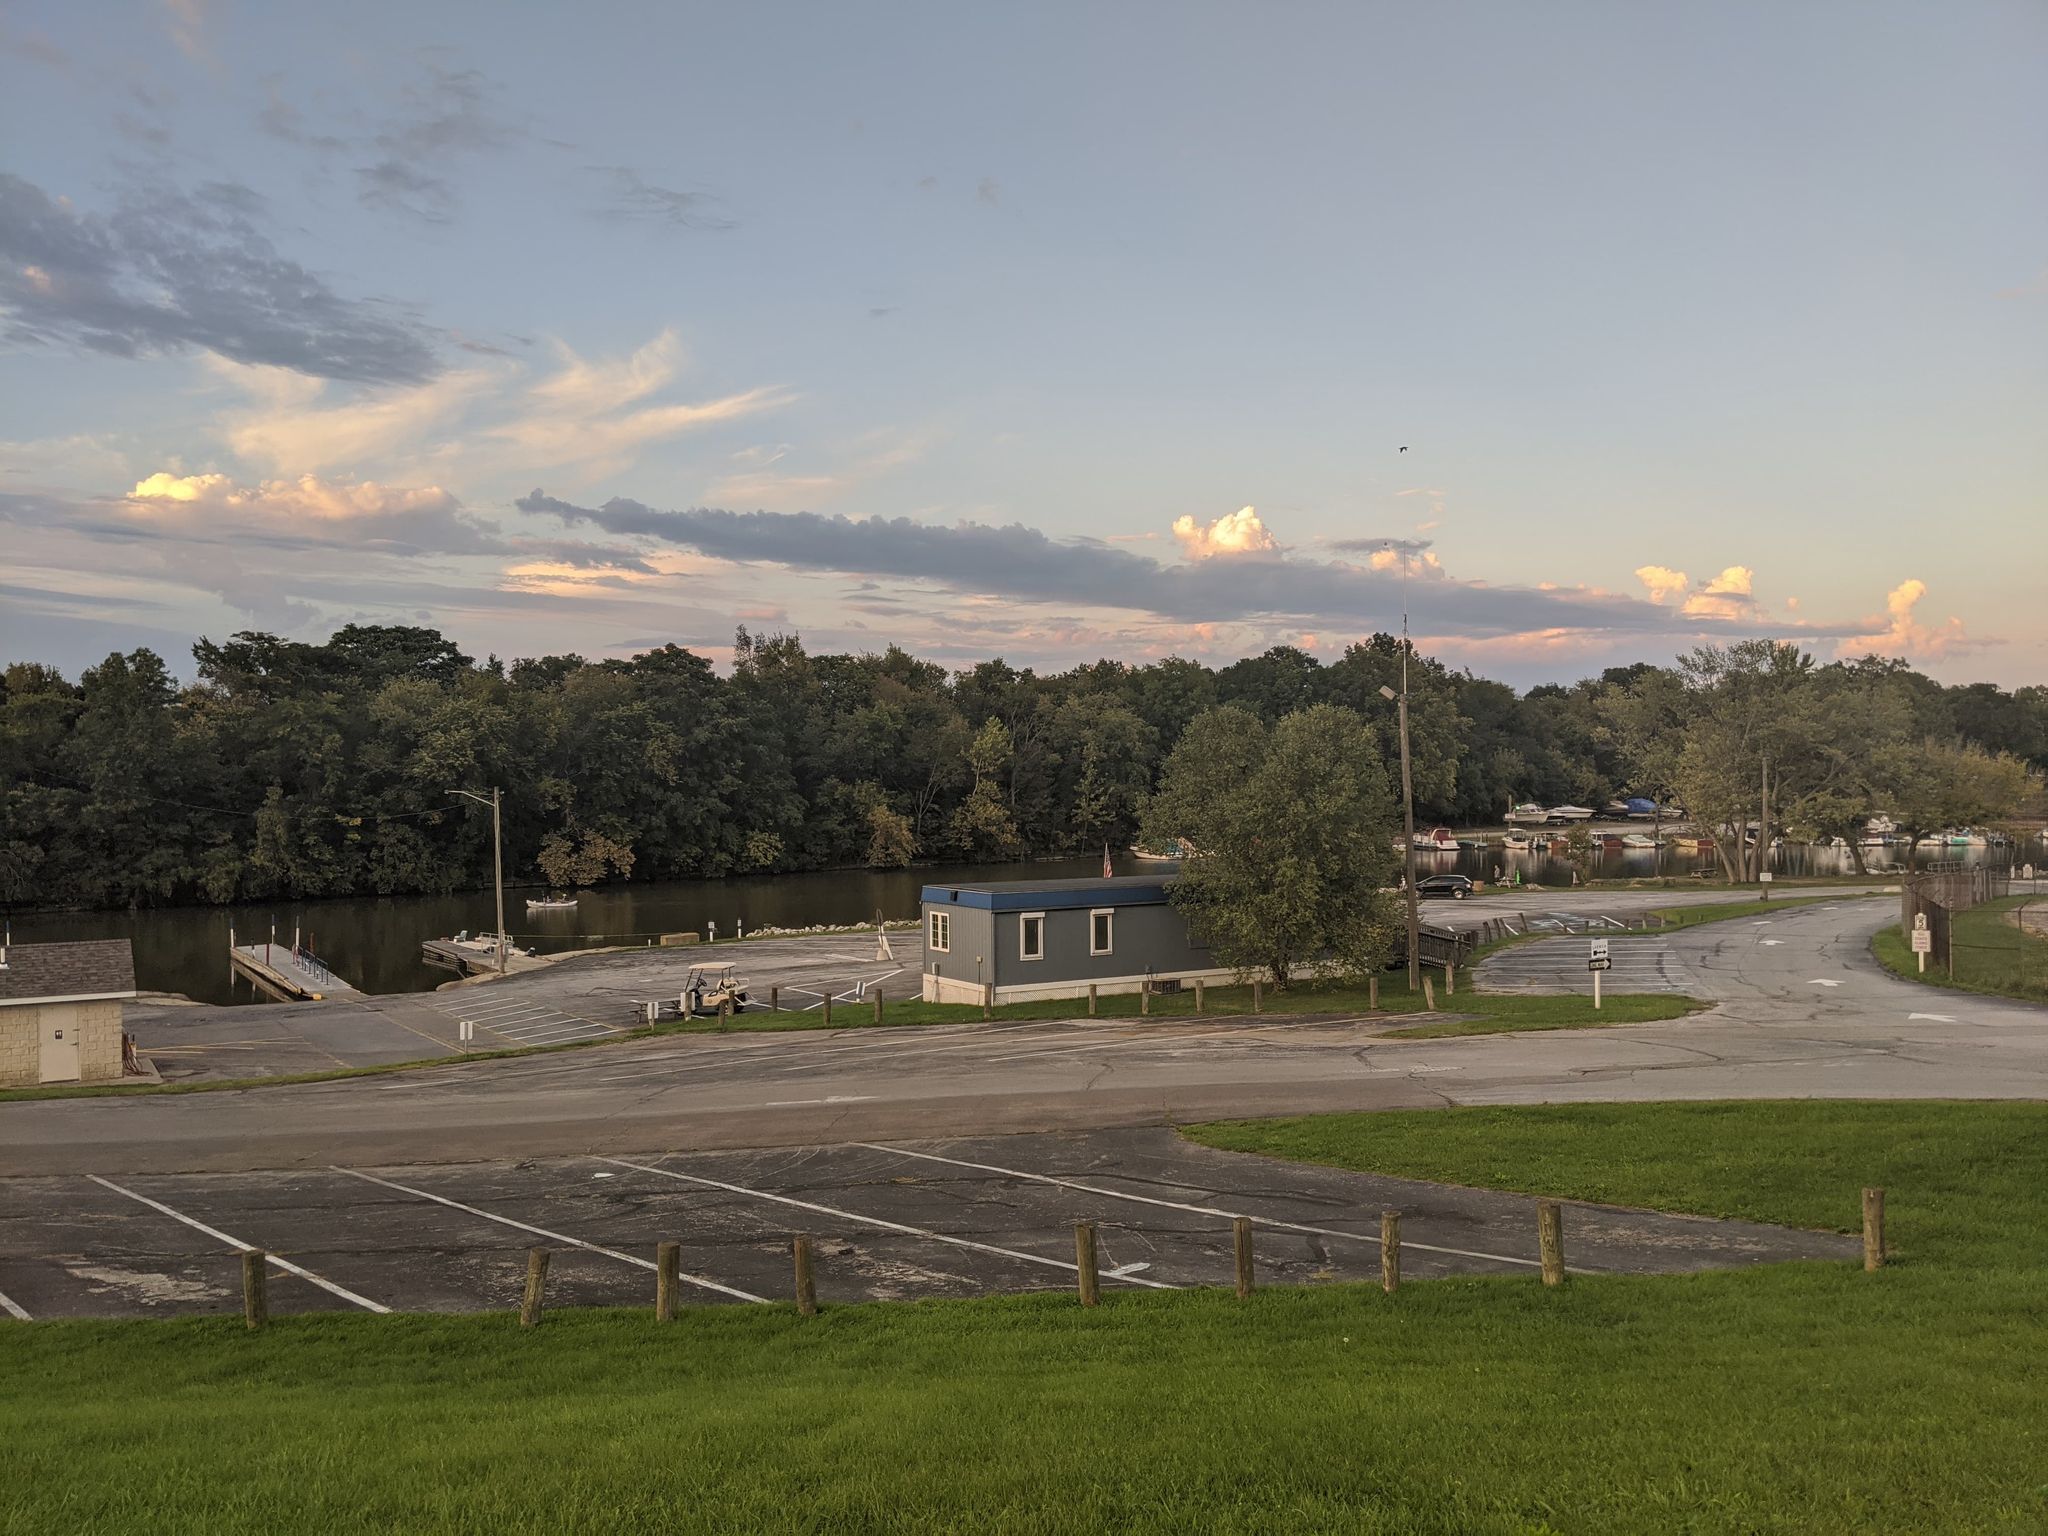 Parking Lot and Trailer and public boat ramp along with view of river and the boat ramp